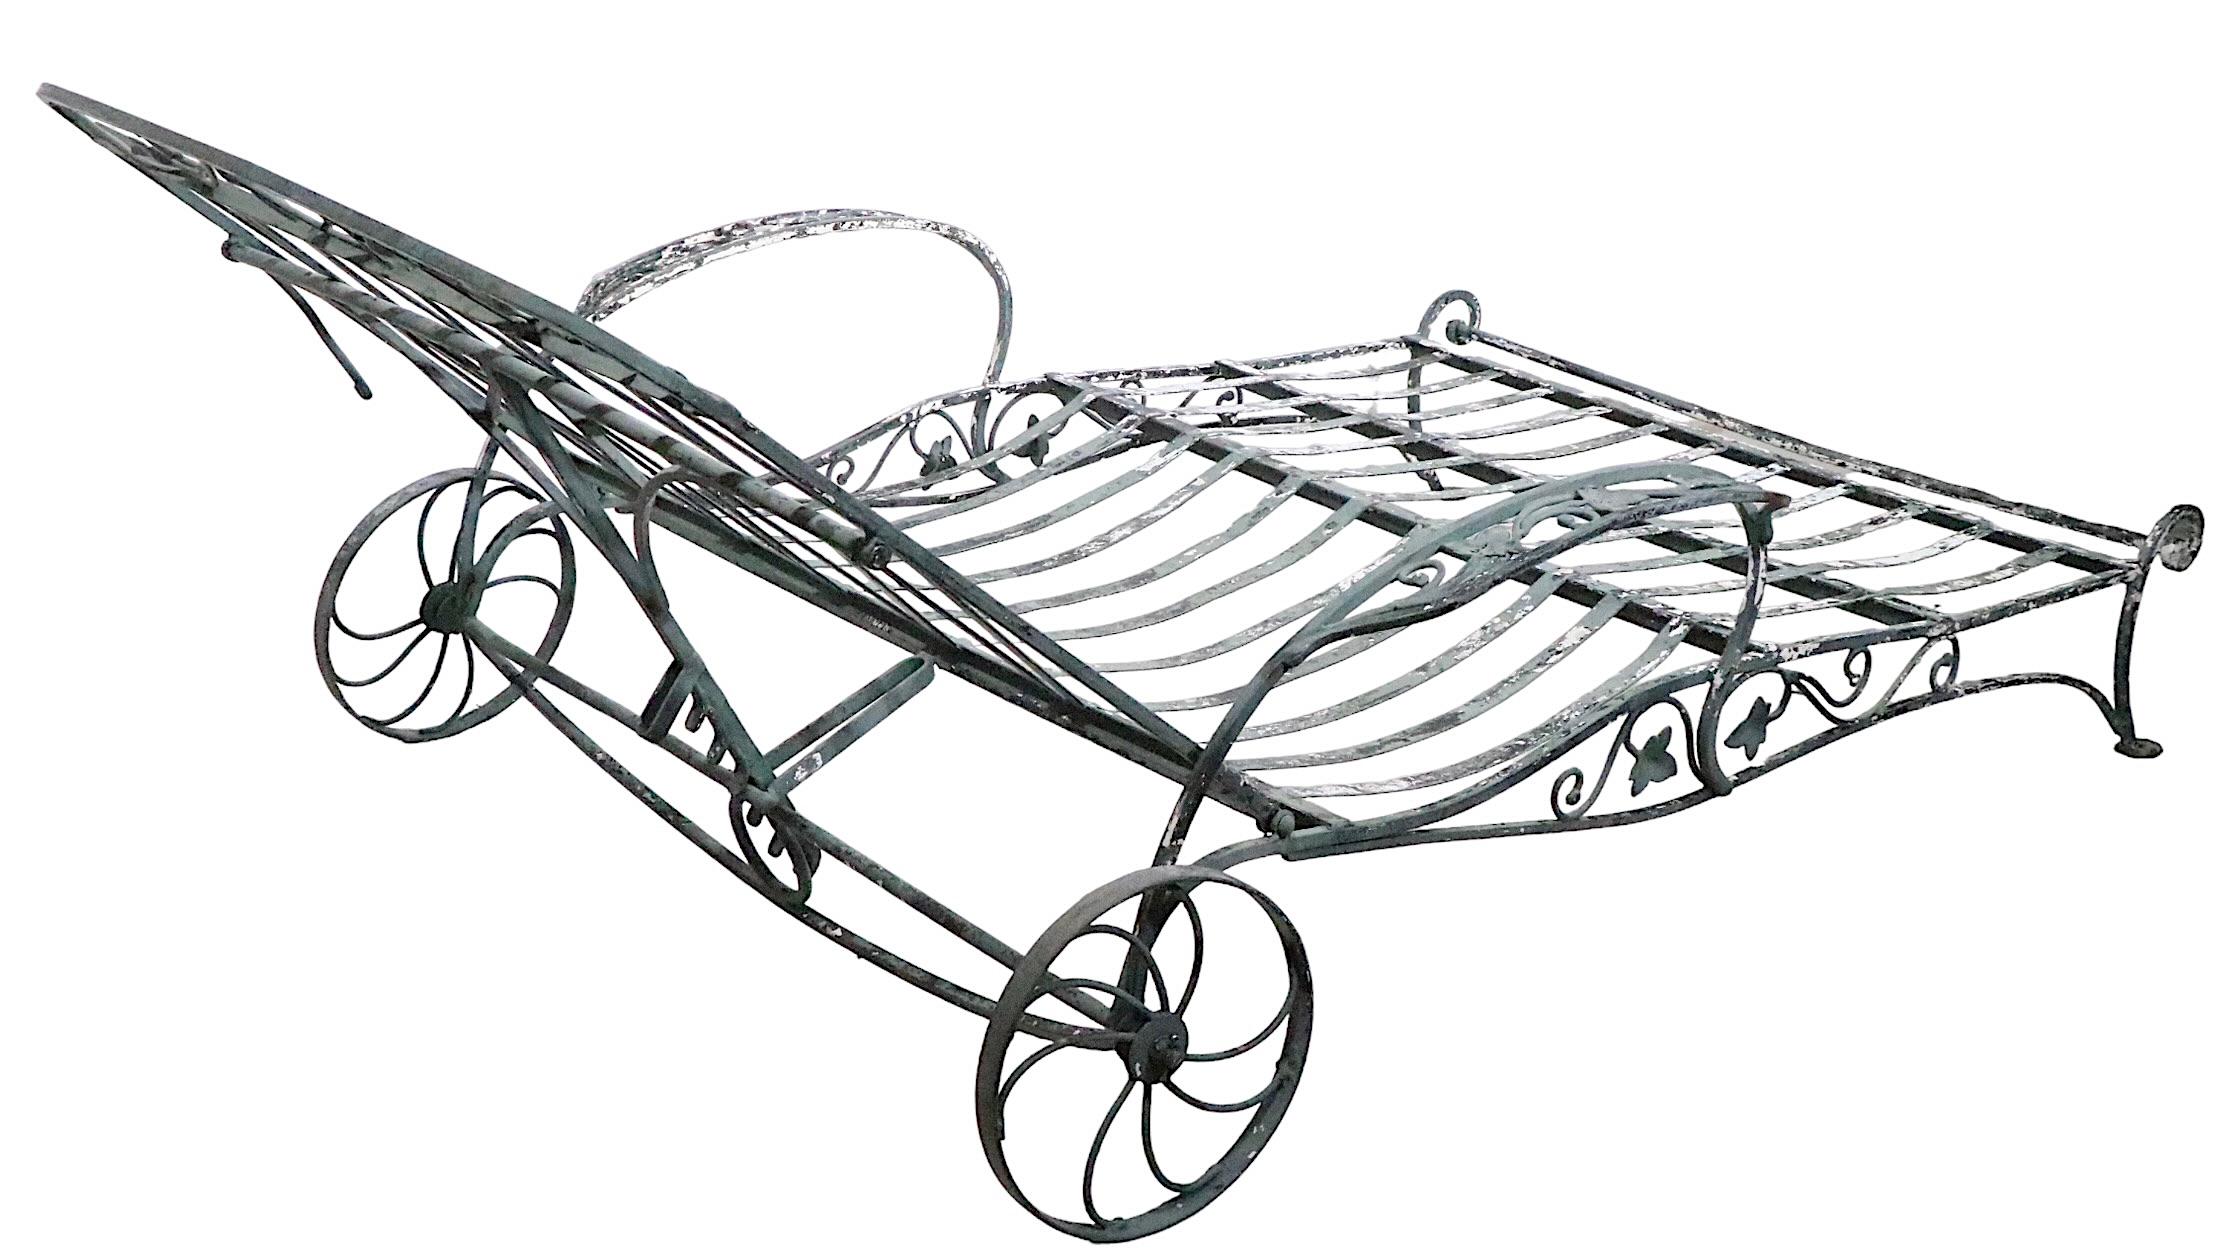  Wrought Iron Garden Patio  Double Wide Reclining Chaise Lounge by Salterini  13